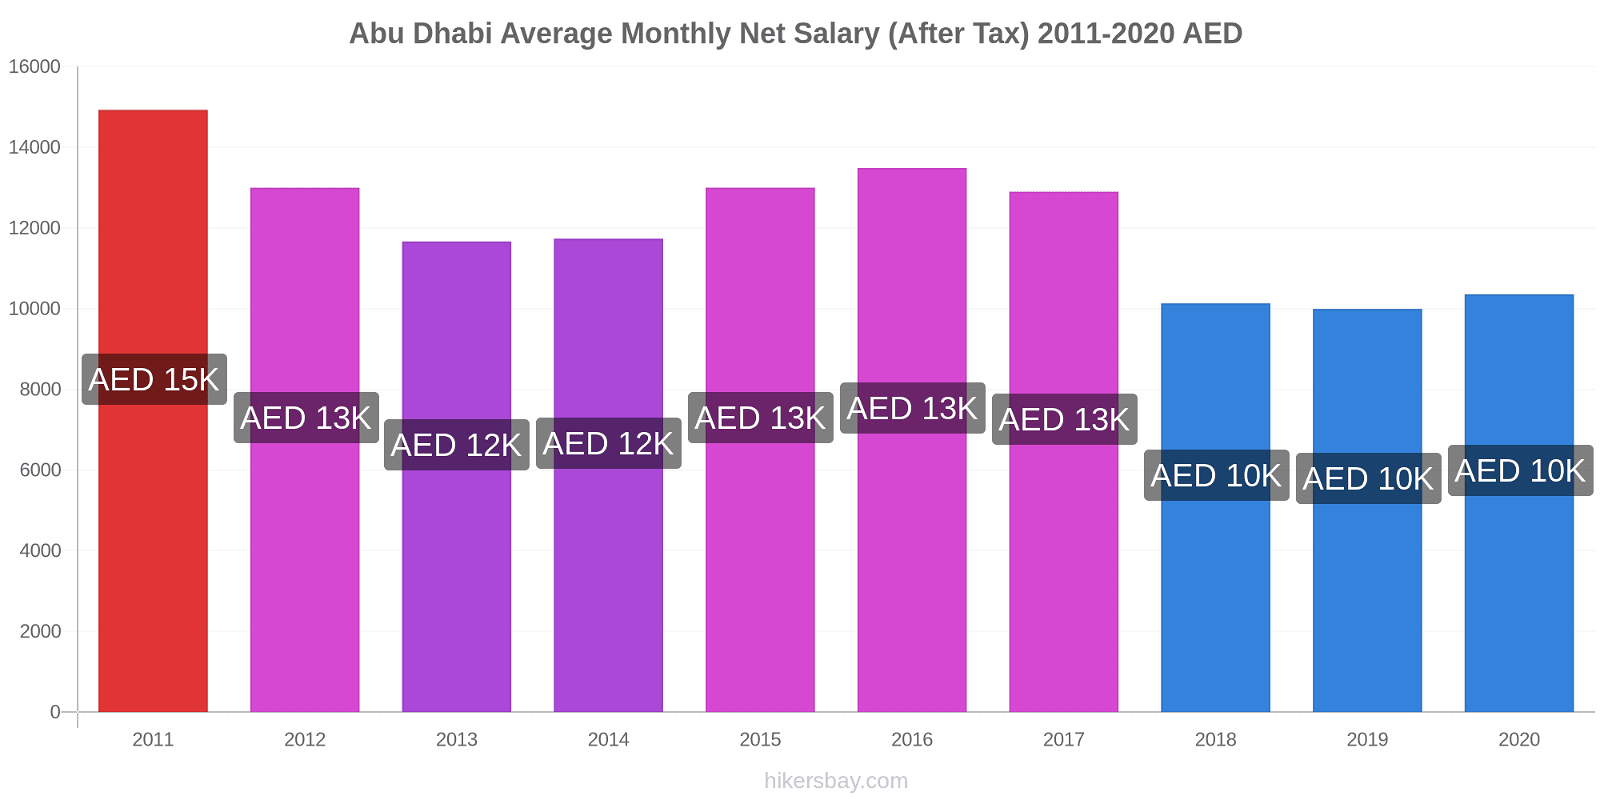 Abu Dhabi price changes Average Monthly Net Salary (After Tax) hikersbay.com